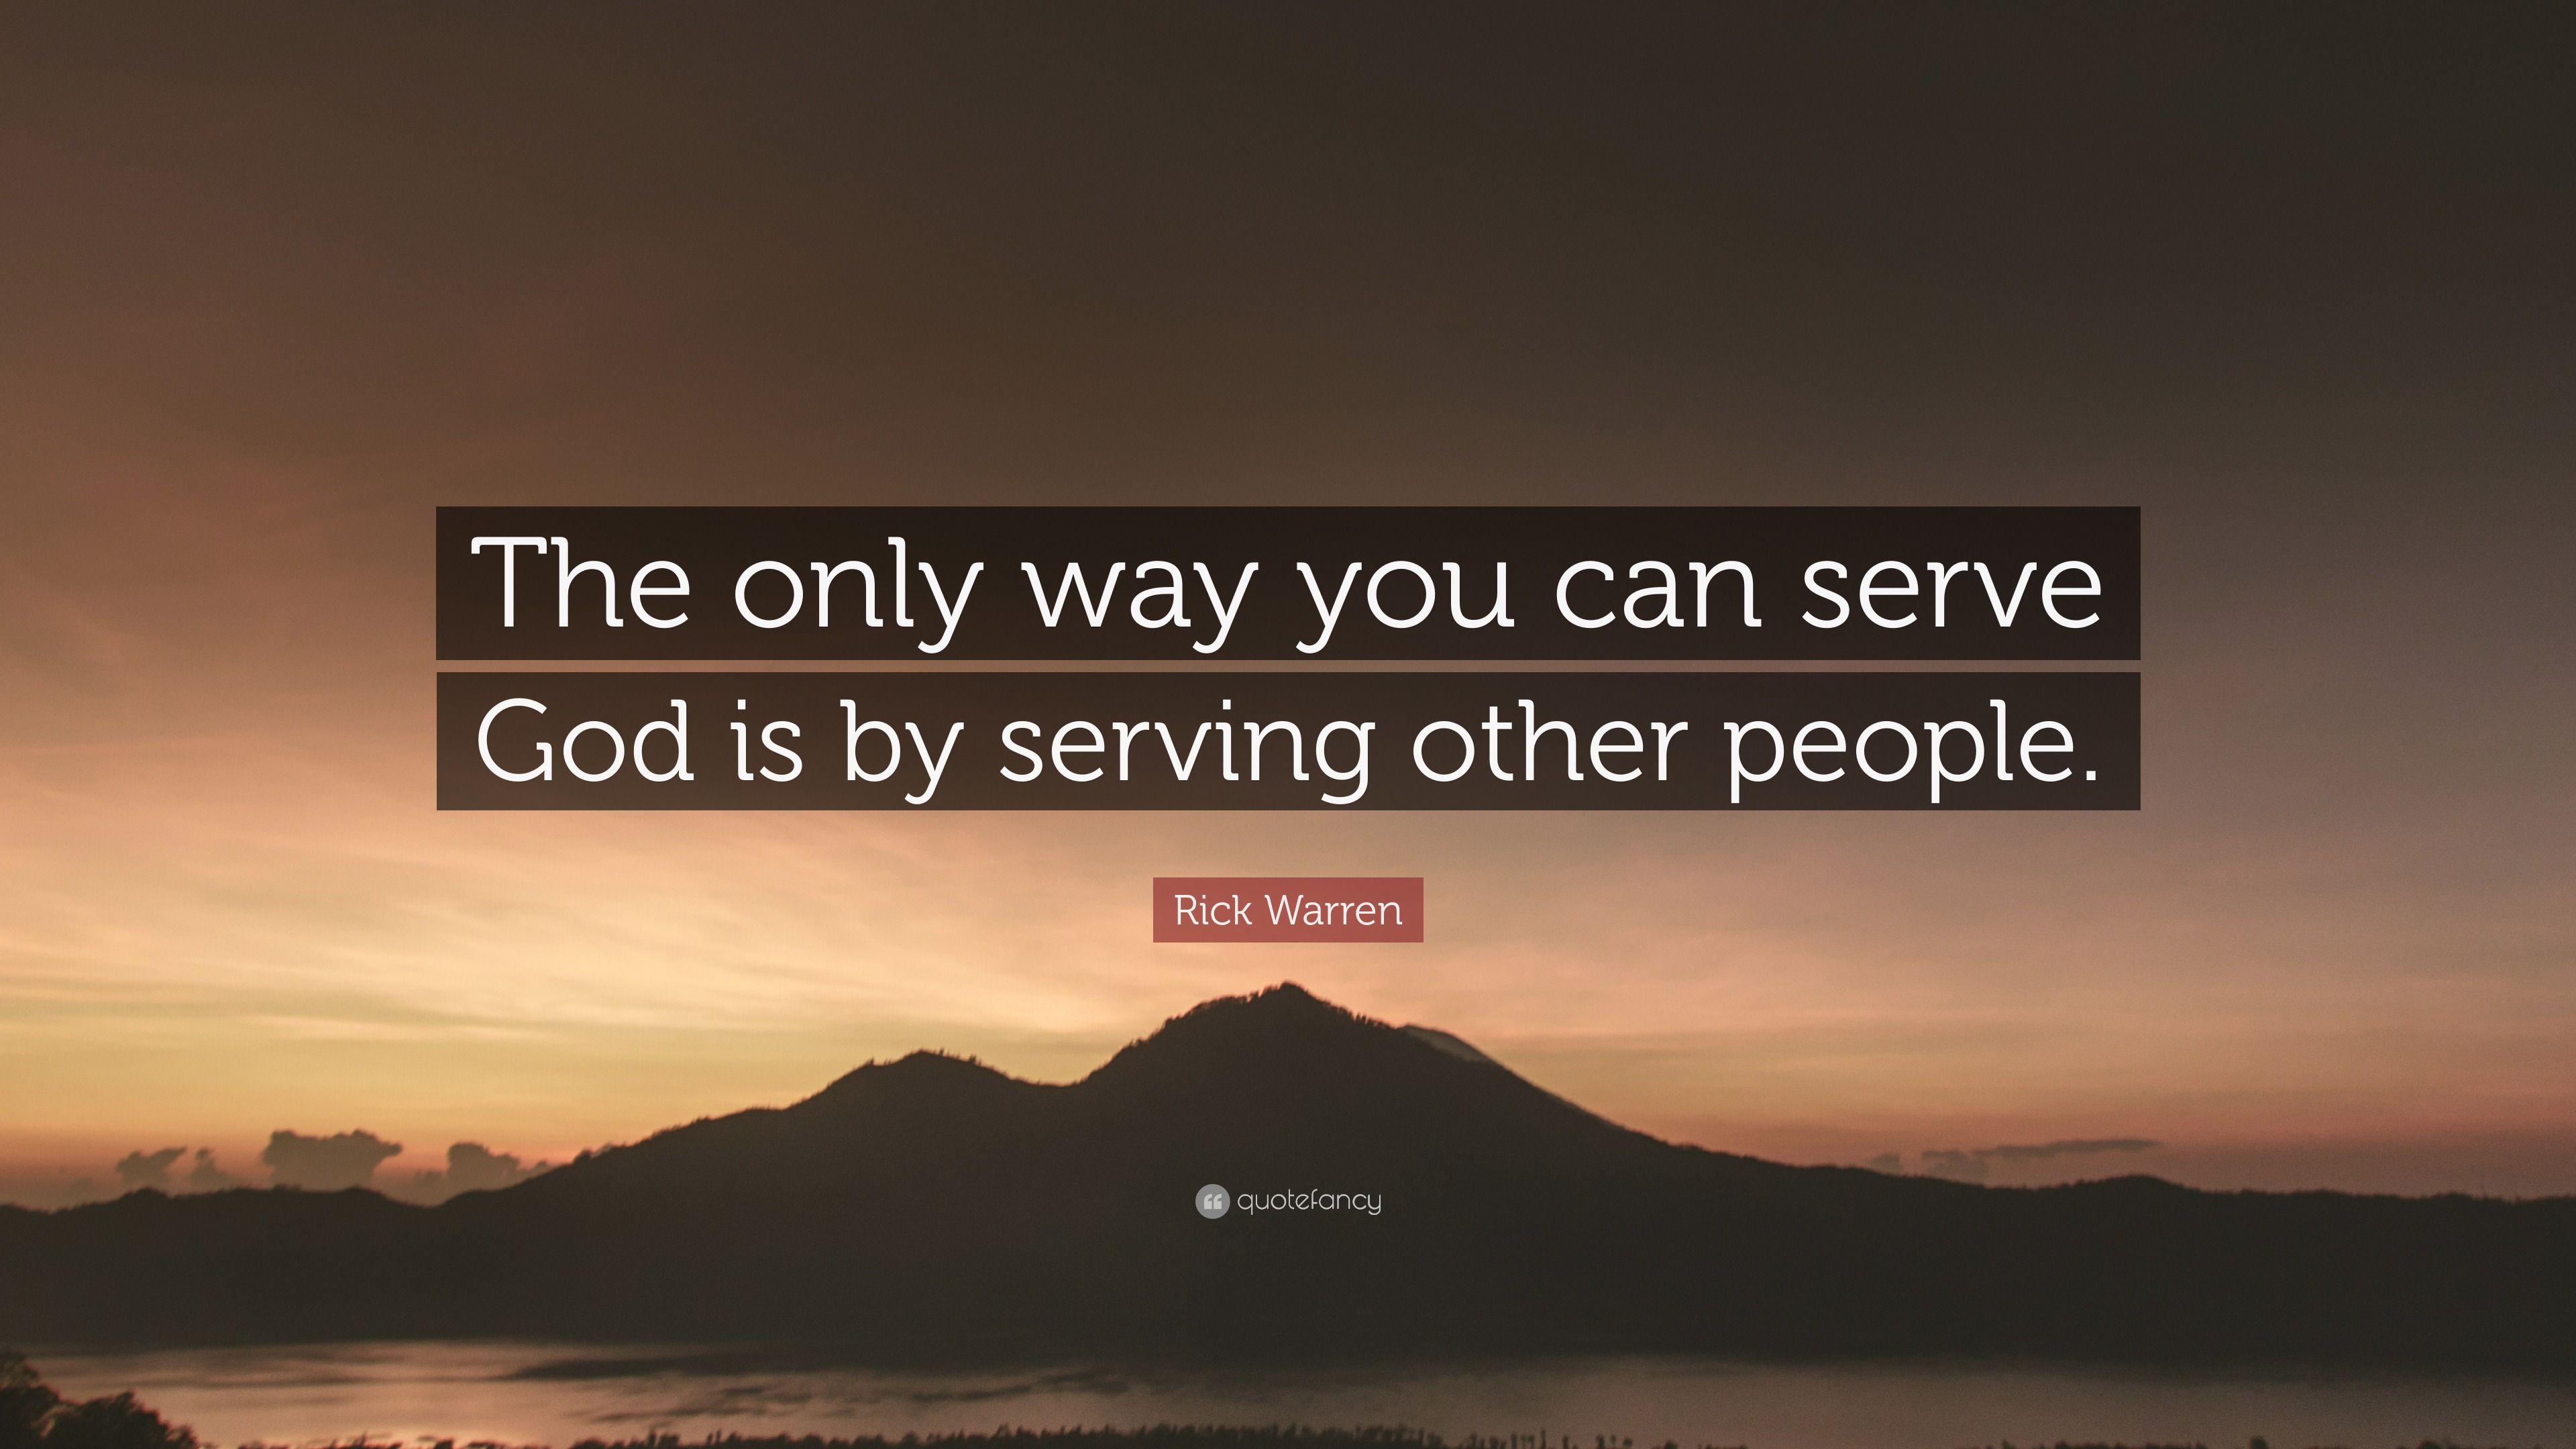 Serve the people